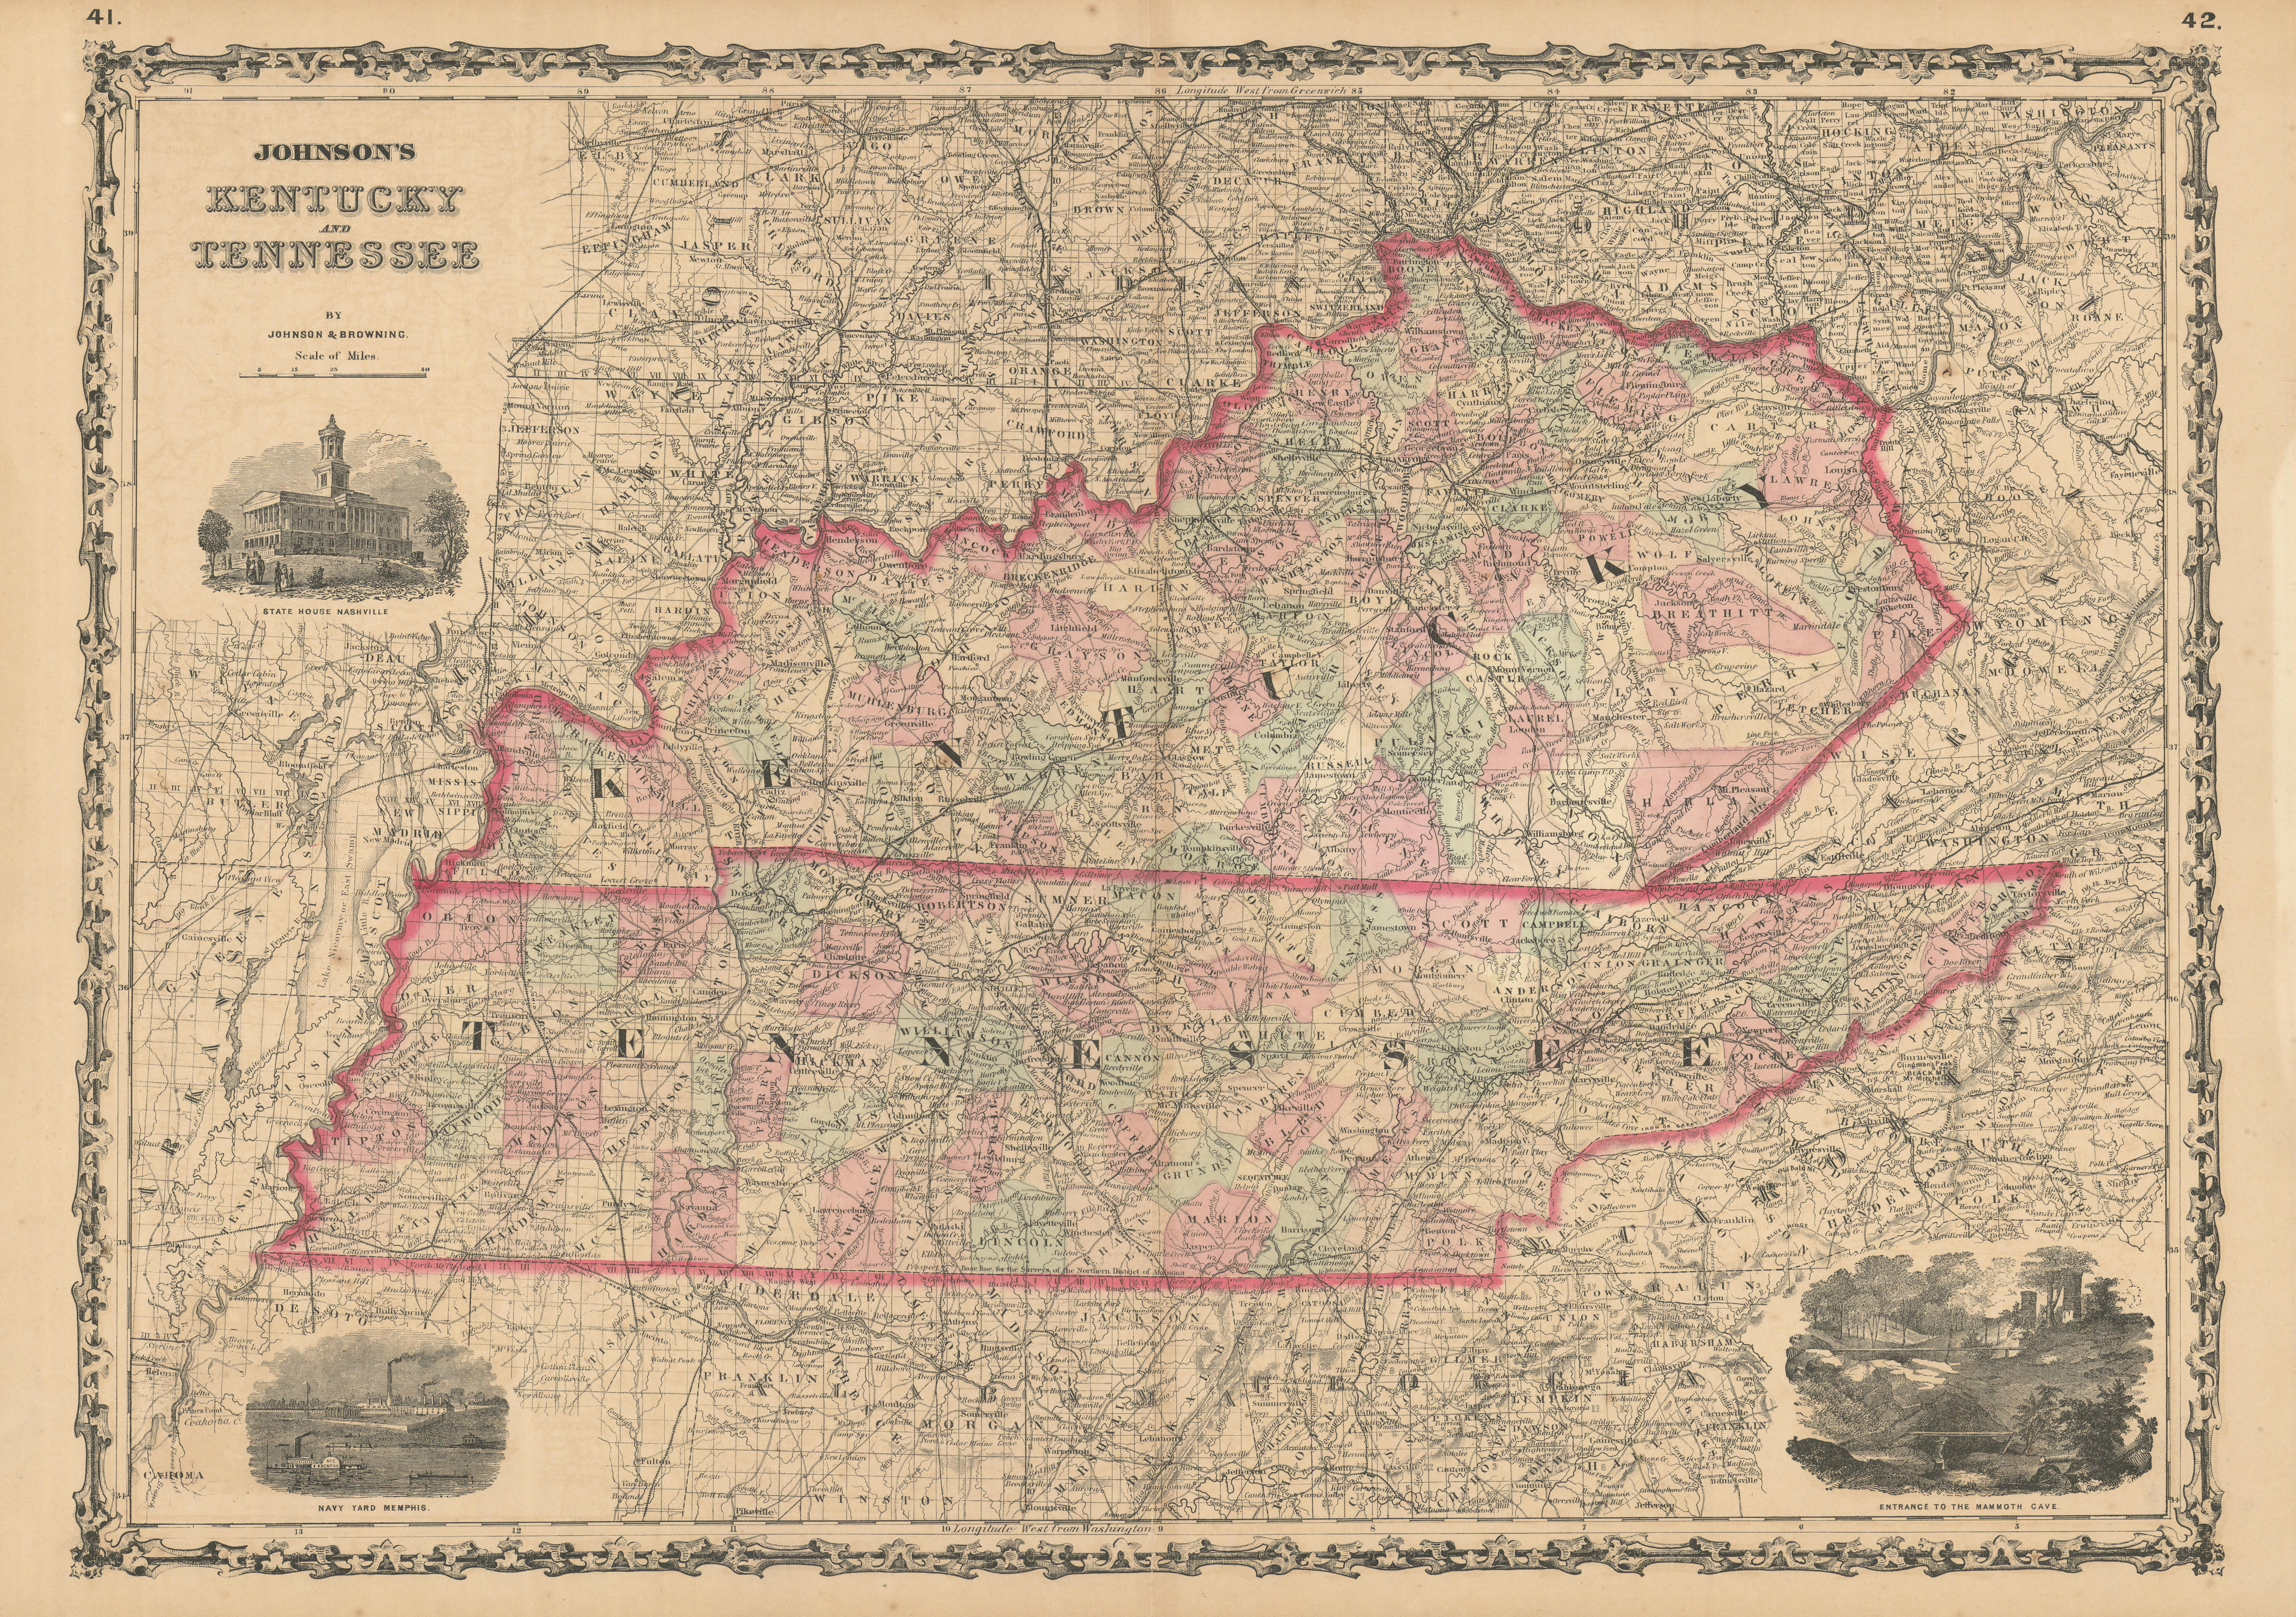 Associate Product Johnson's Kentucky and Tennessee. US state map showing counties 1861 old